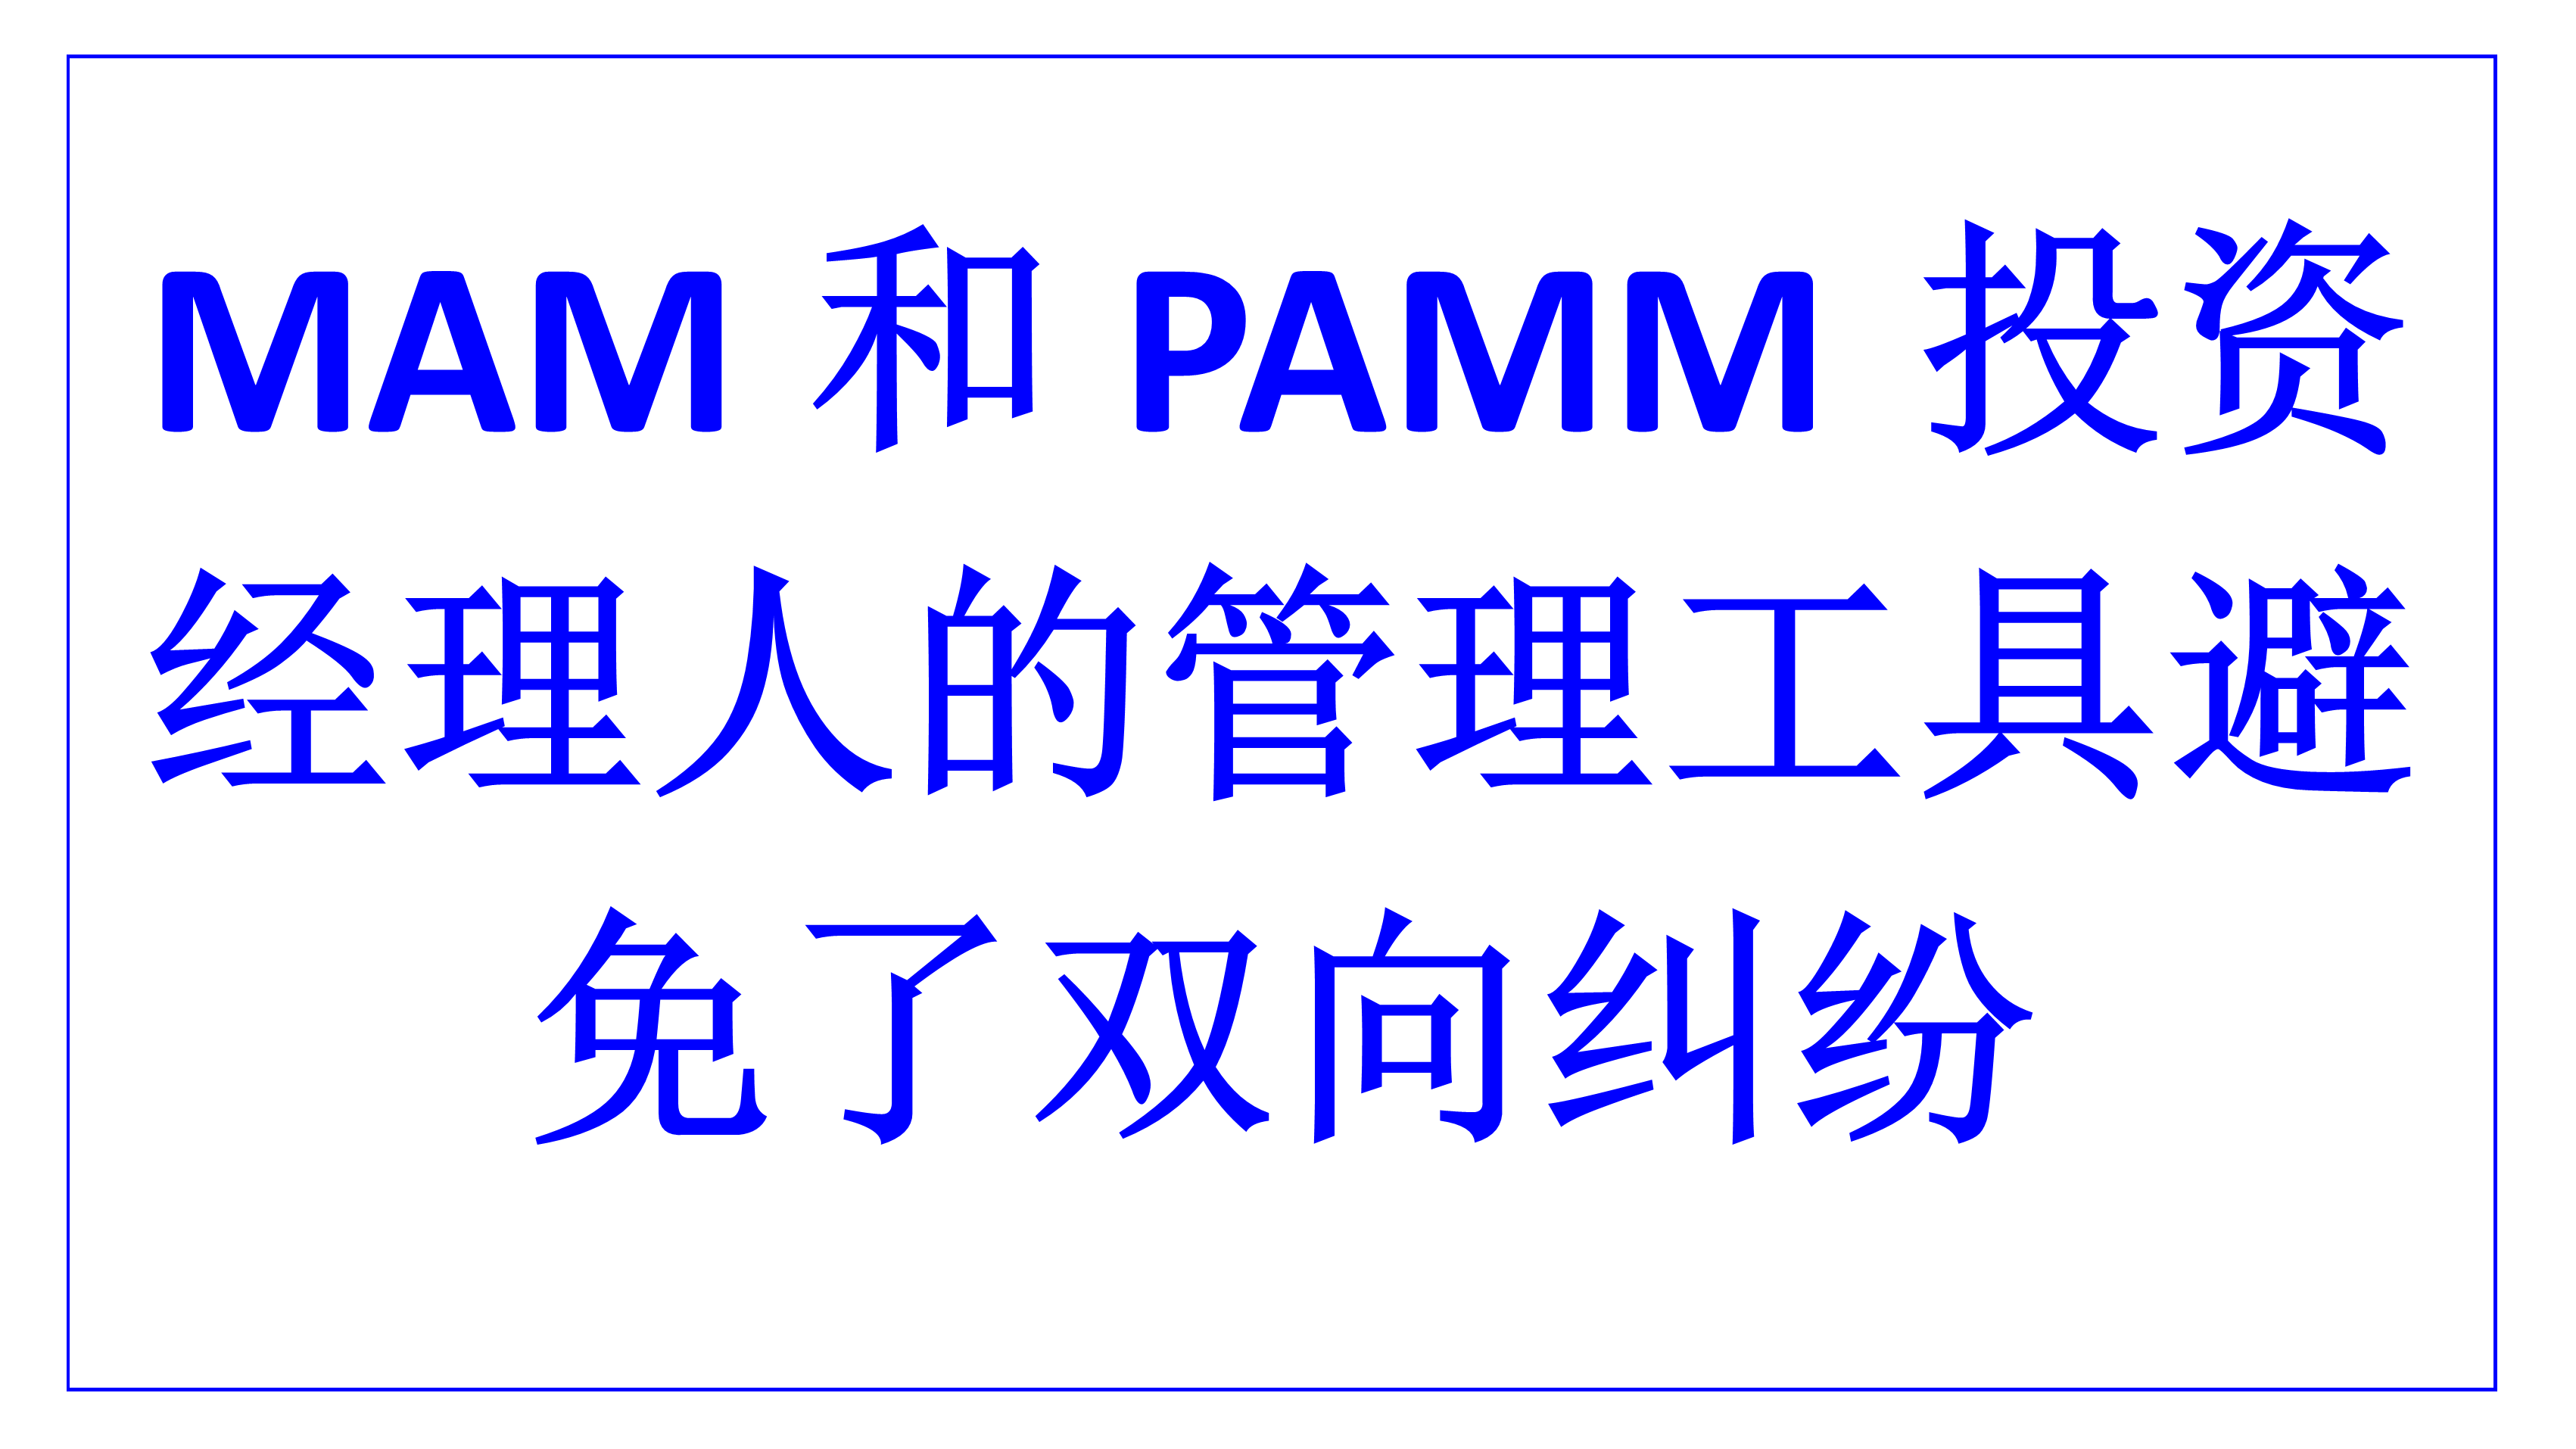 mam pamm tools to avoid disputes cn